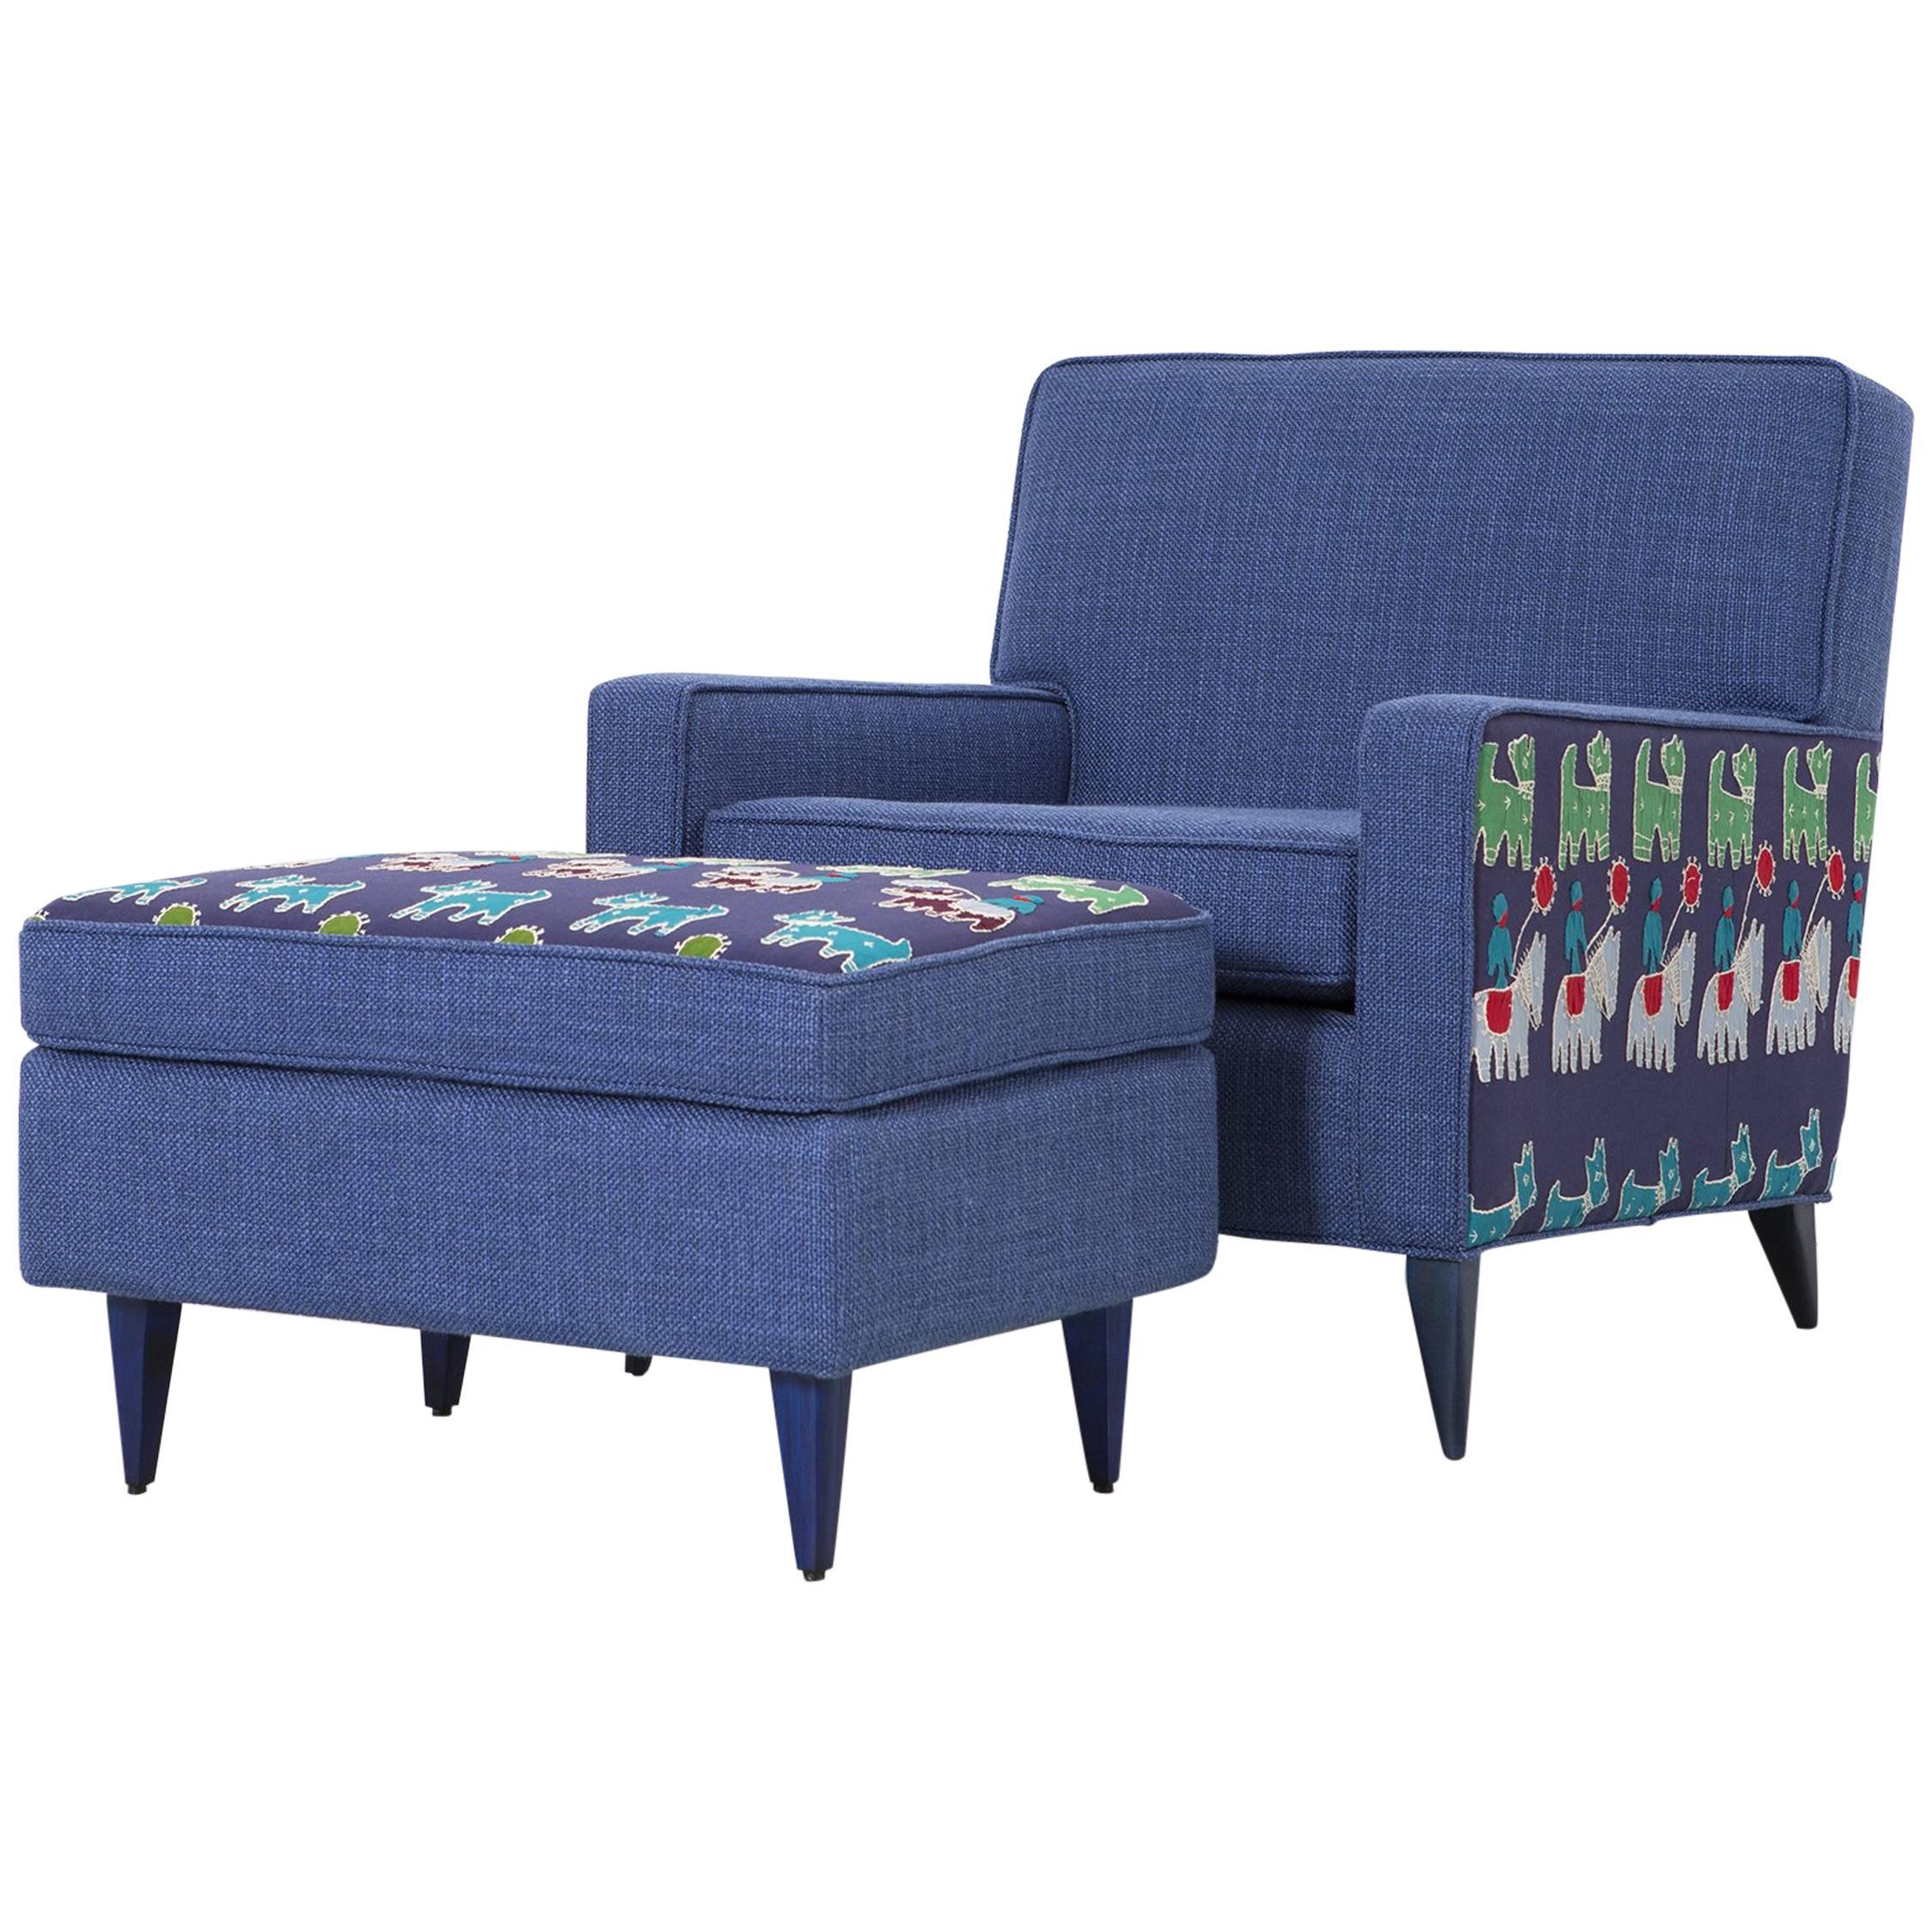 McCobb Chair and Ottoman Reupholstered in Maharam Cotton + 1940s Indian Cloth For Sale